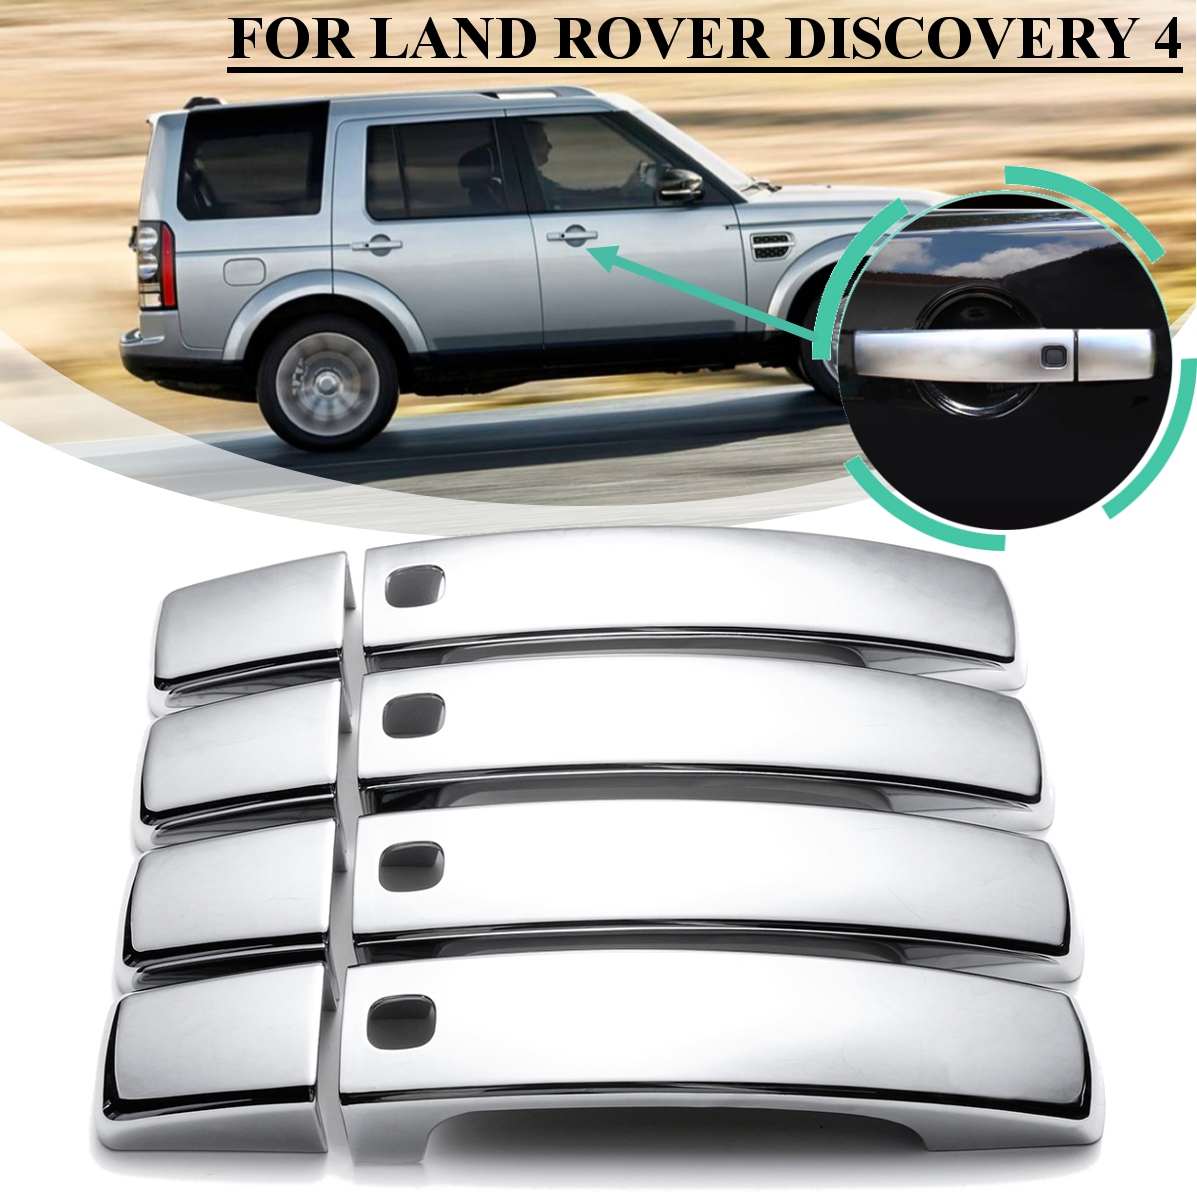 Abs Chrome Gloss Black Door Handle Covers Trim Car Accessories For Land Rover Discovery 4 Range Rover Sport Freelander 2: Chromed Style